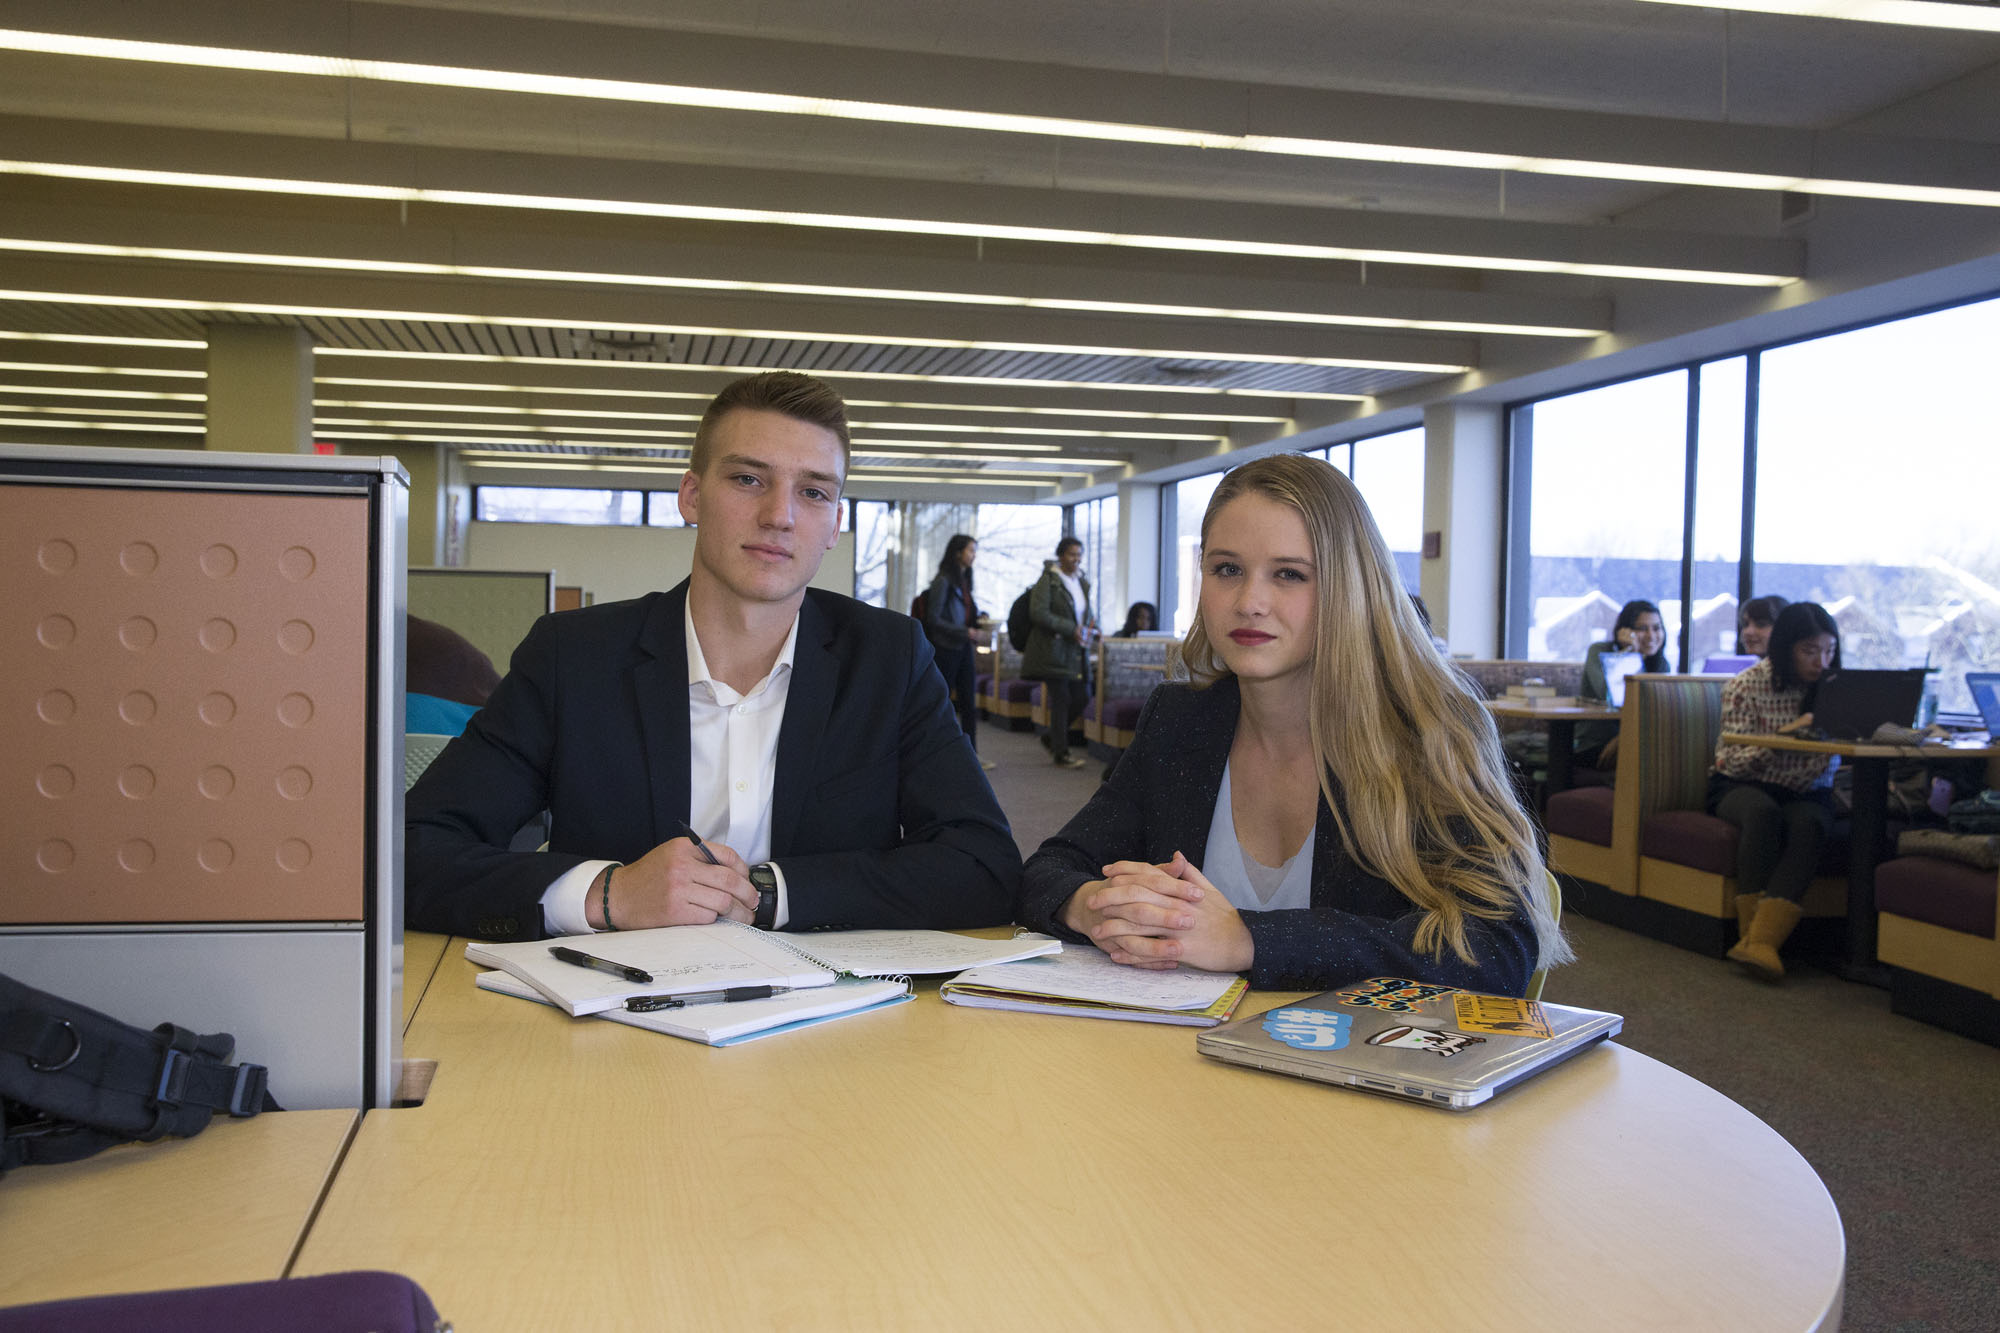 Orion Williams, left, and Sarah Koch sit at a table with notebooks smiling at the camera